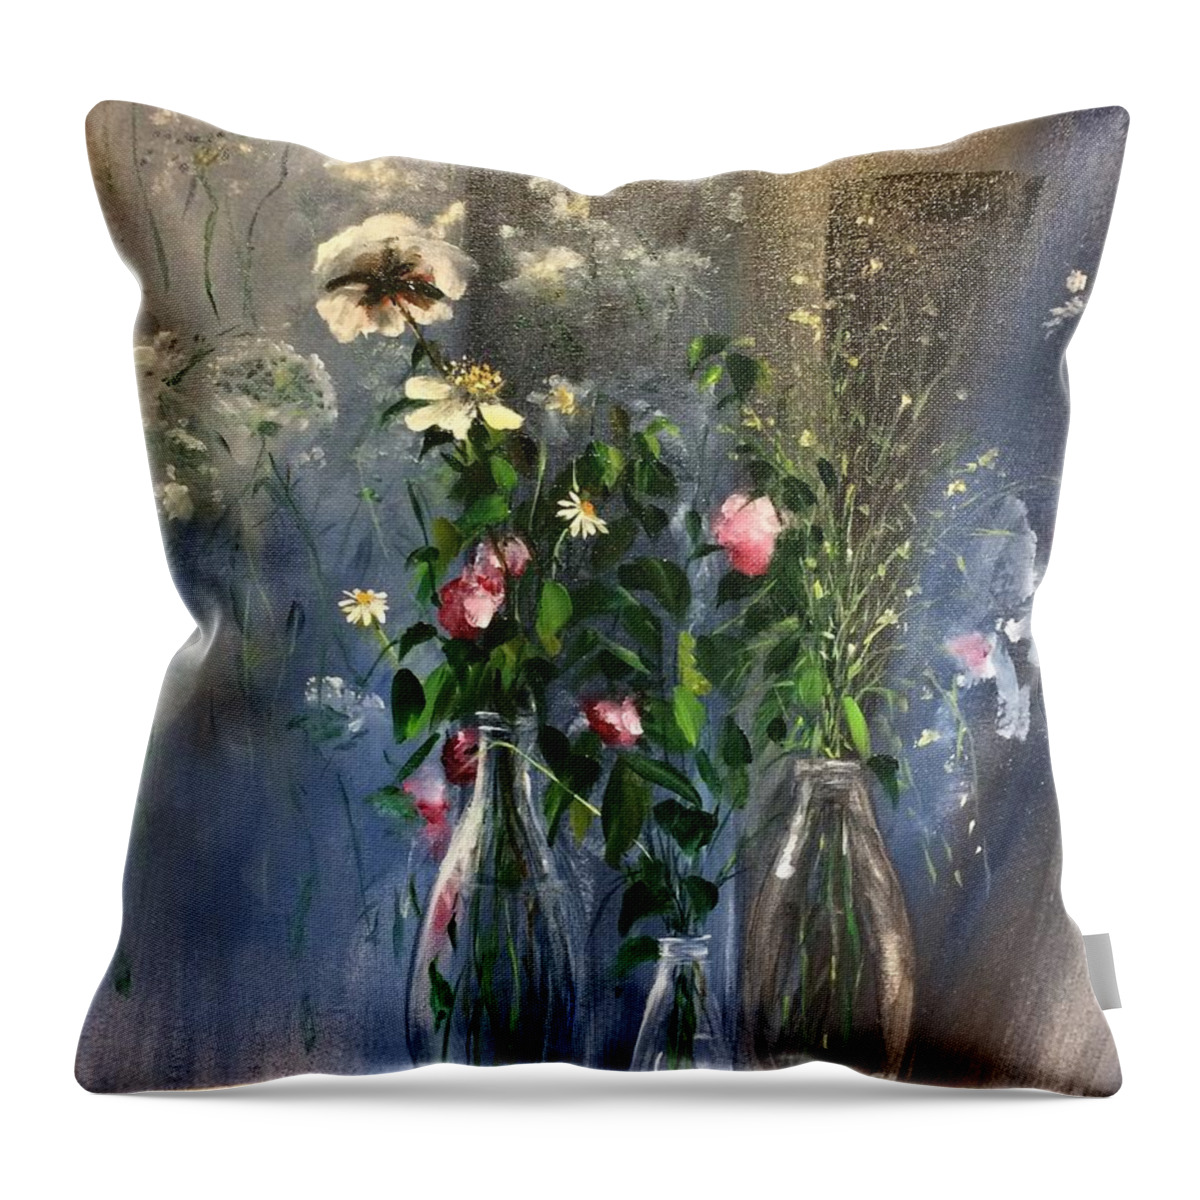 Lizzy Forrester Throw Pillow featuring the painting Flower Power for a Mural II by Lizzy Forrester